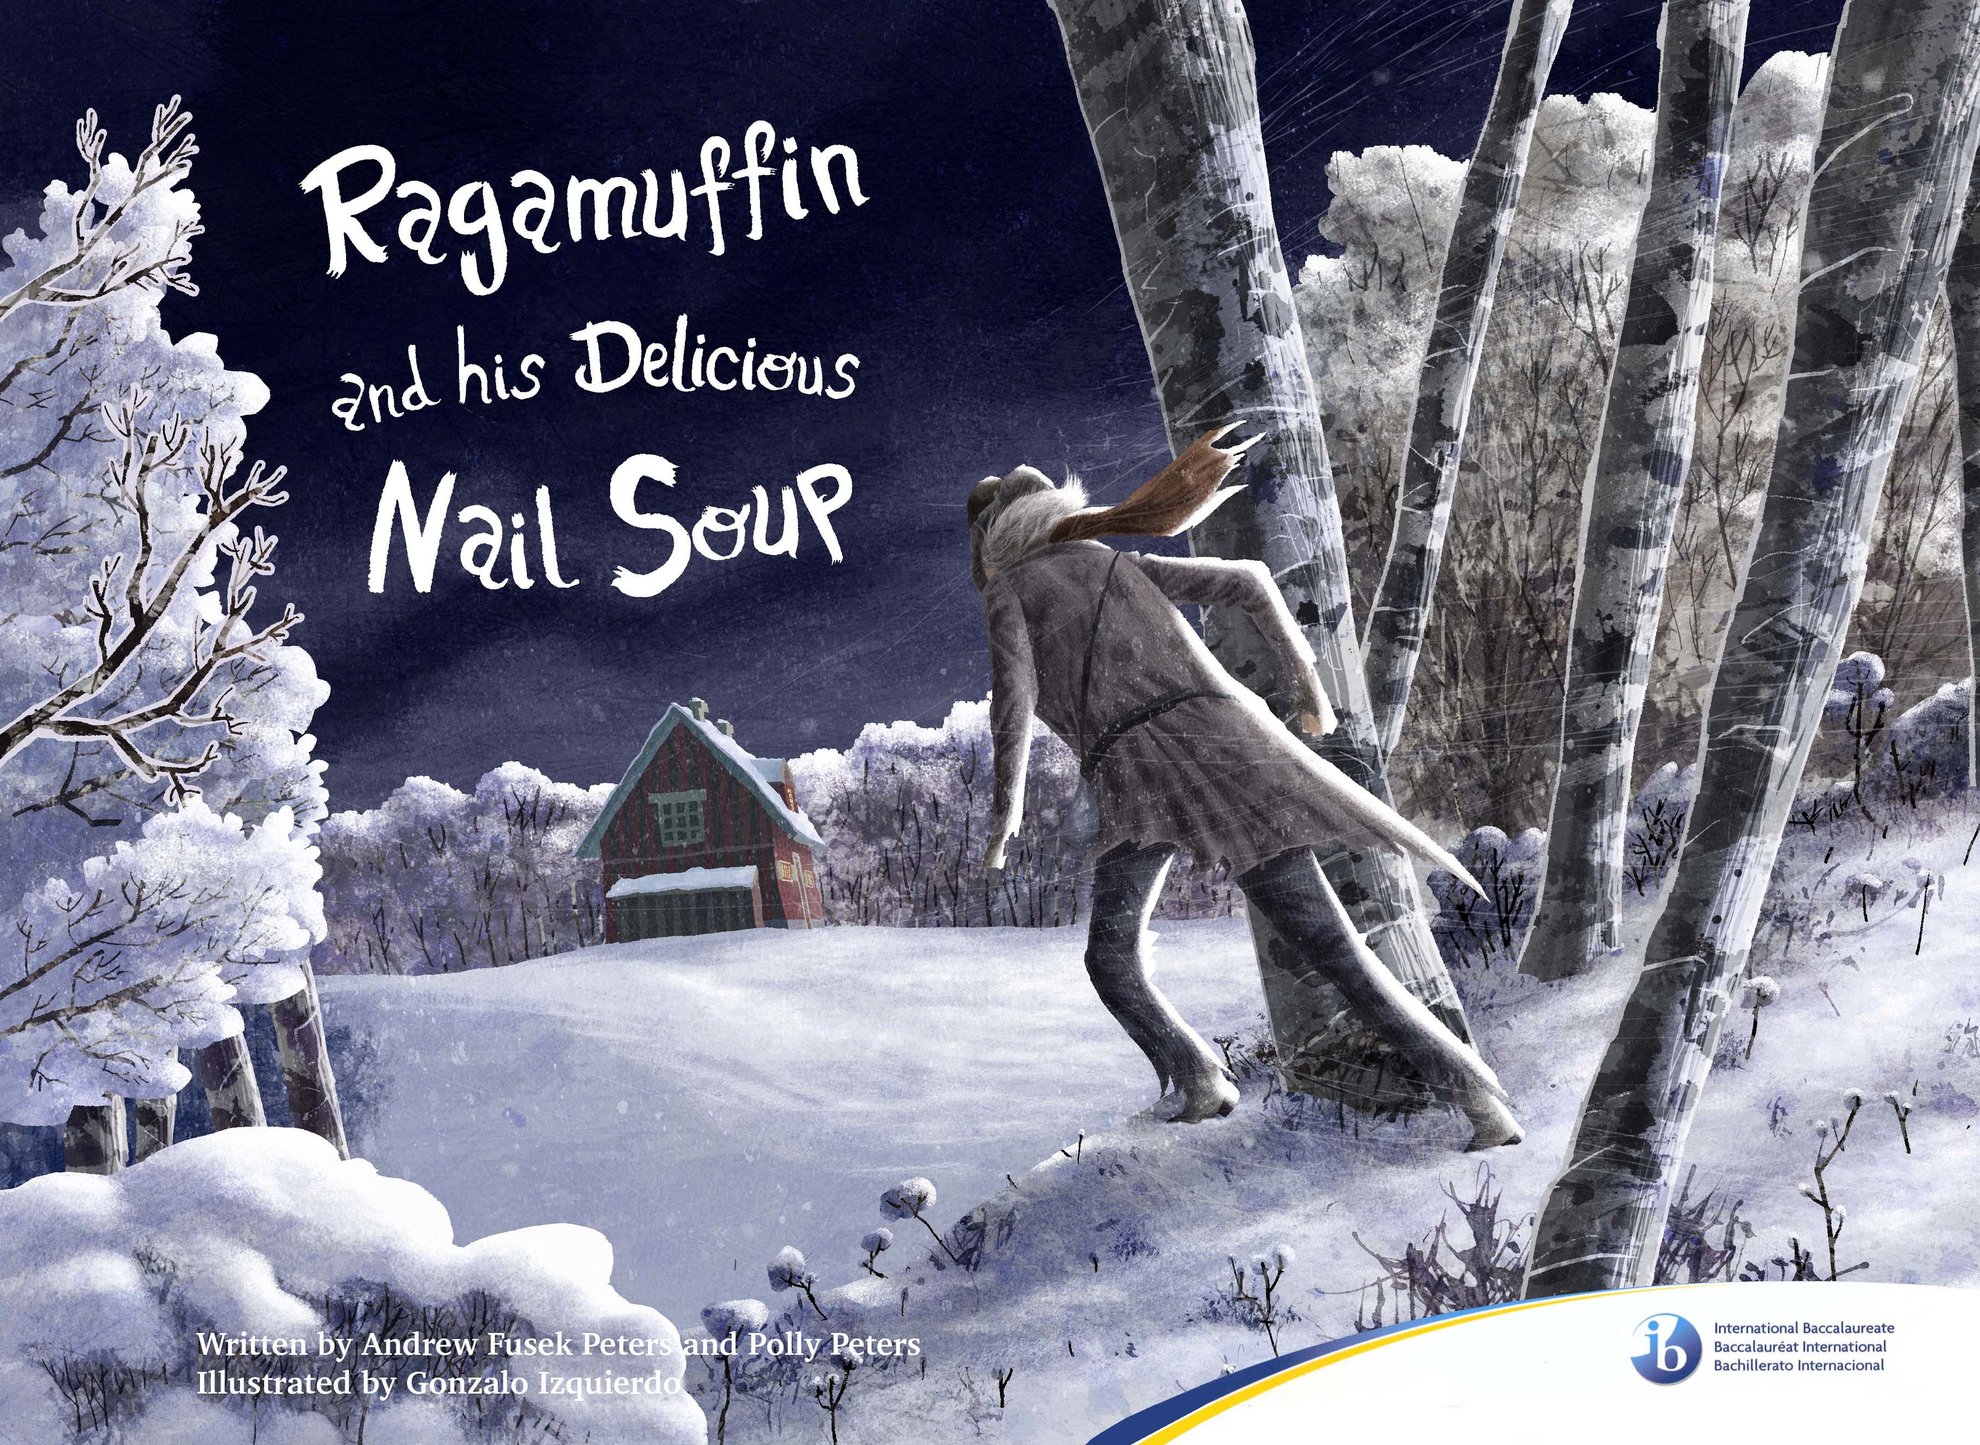 Ragamuffin and his delicious nail soup.